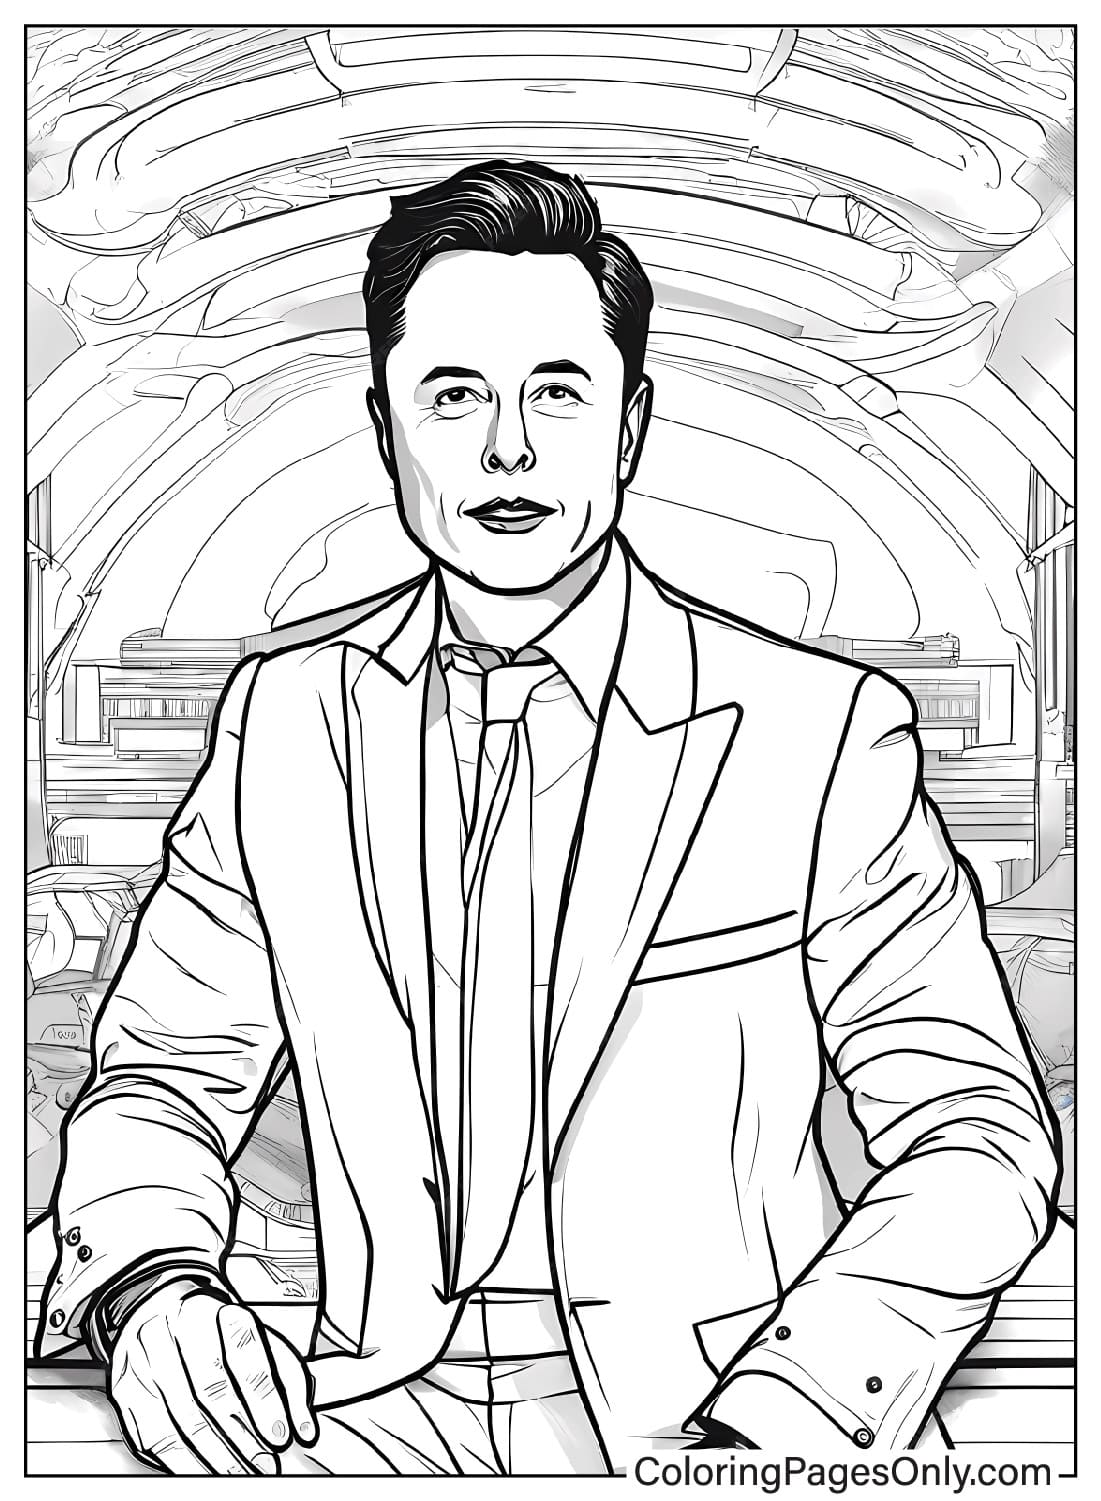 Coloring Page Free Elon Musk from Elon Musk